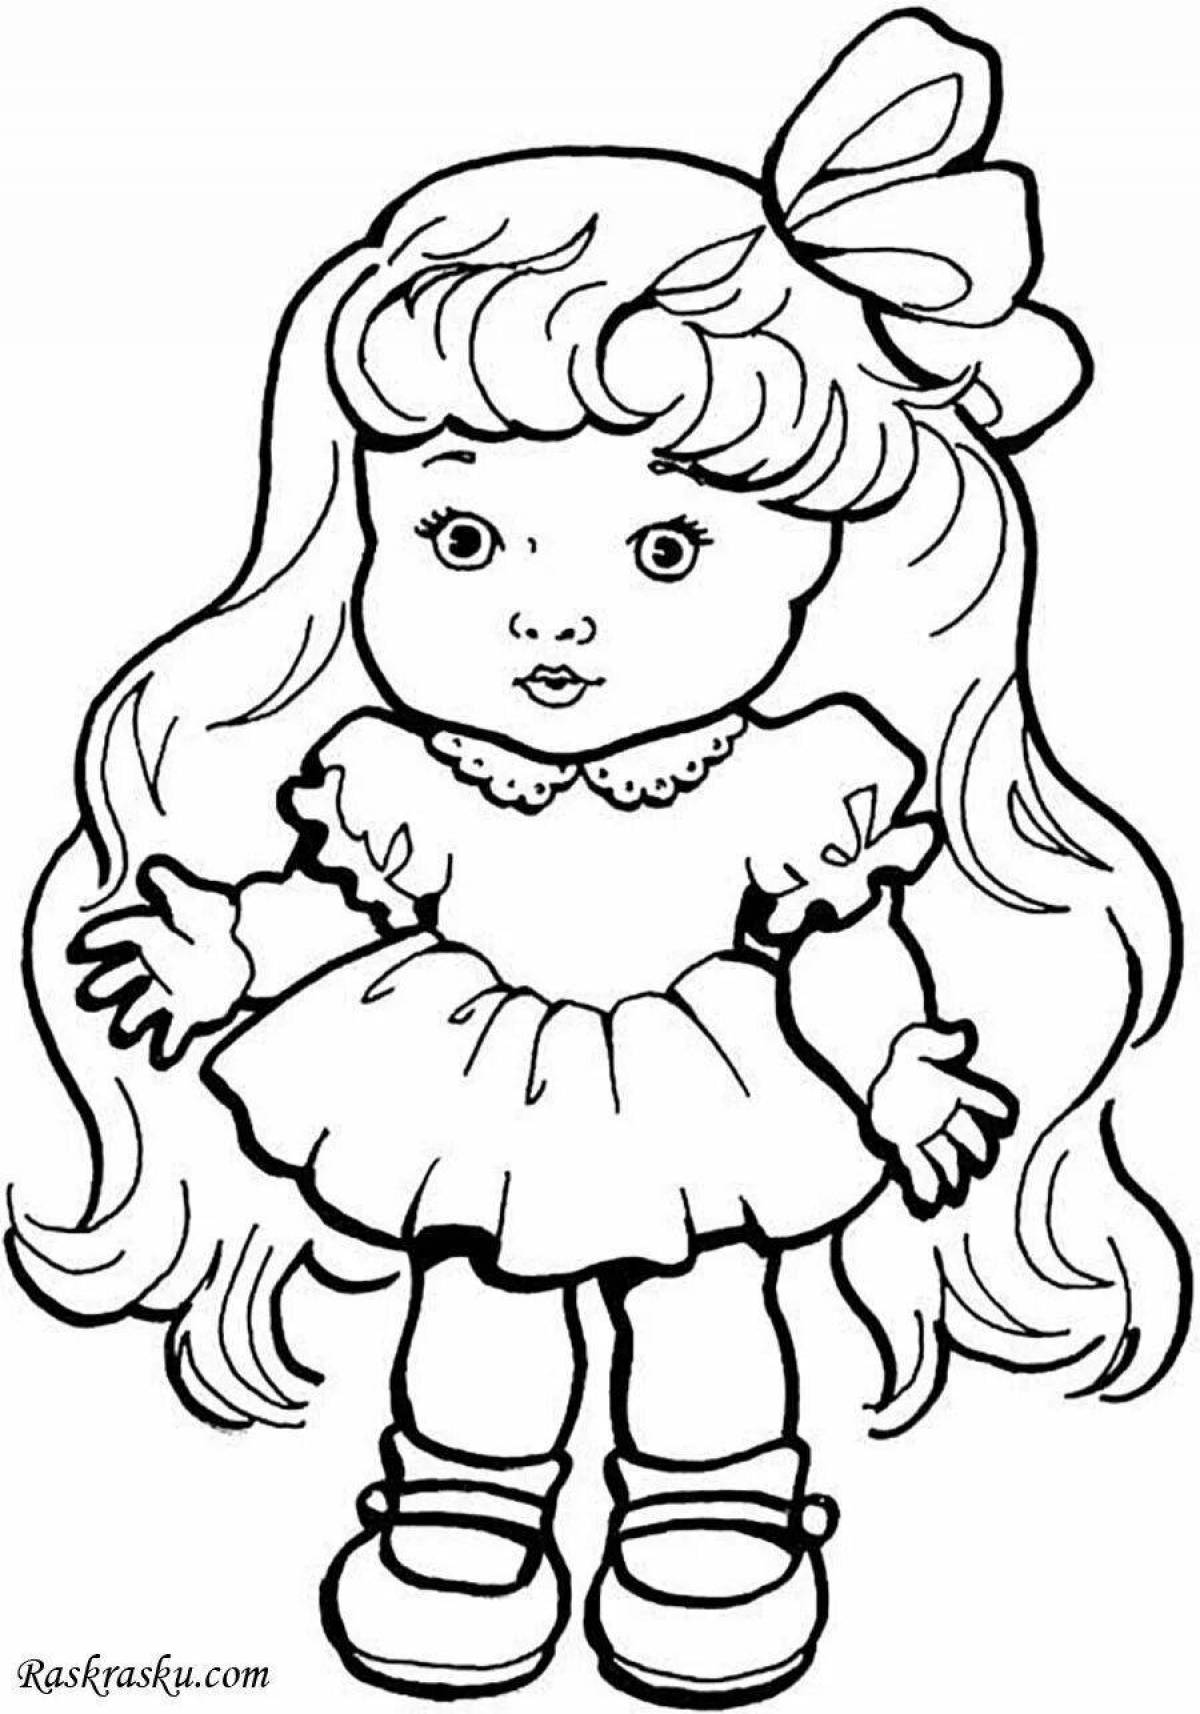 Coloring page funny dolly